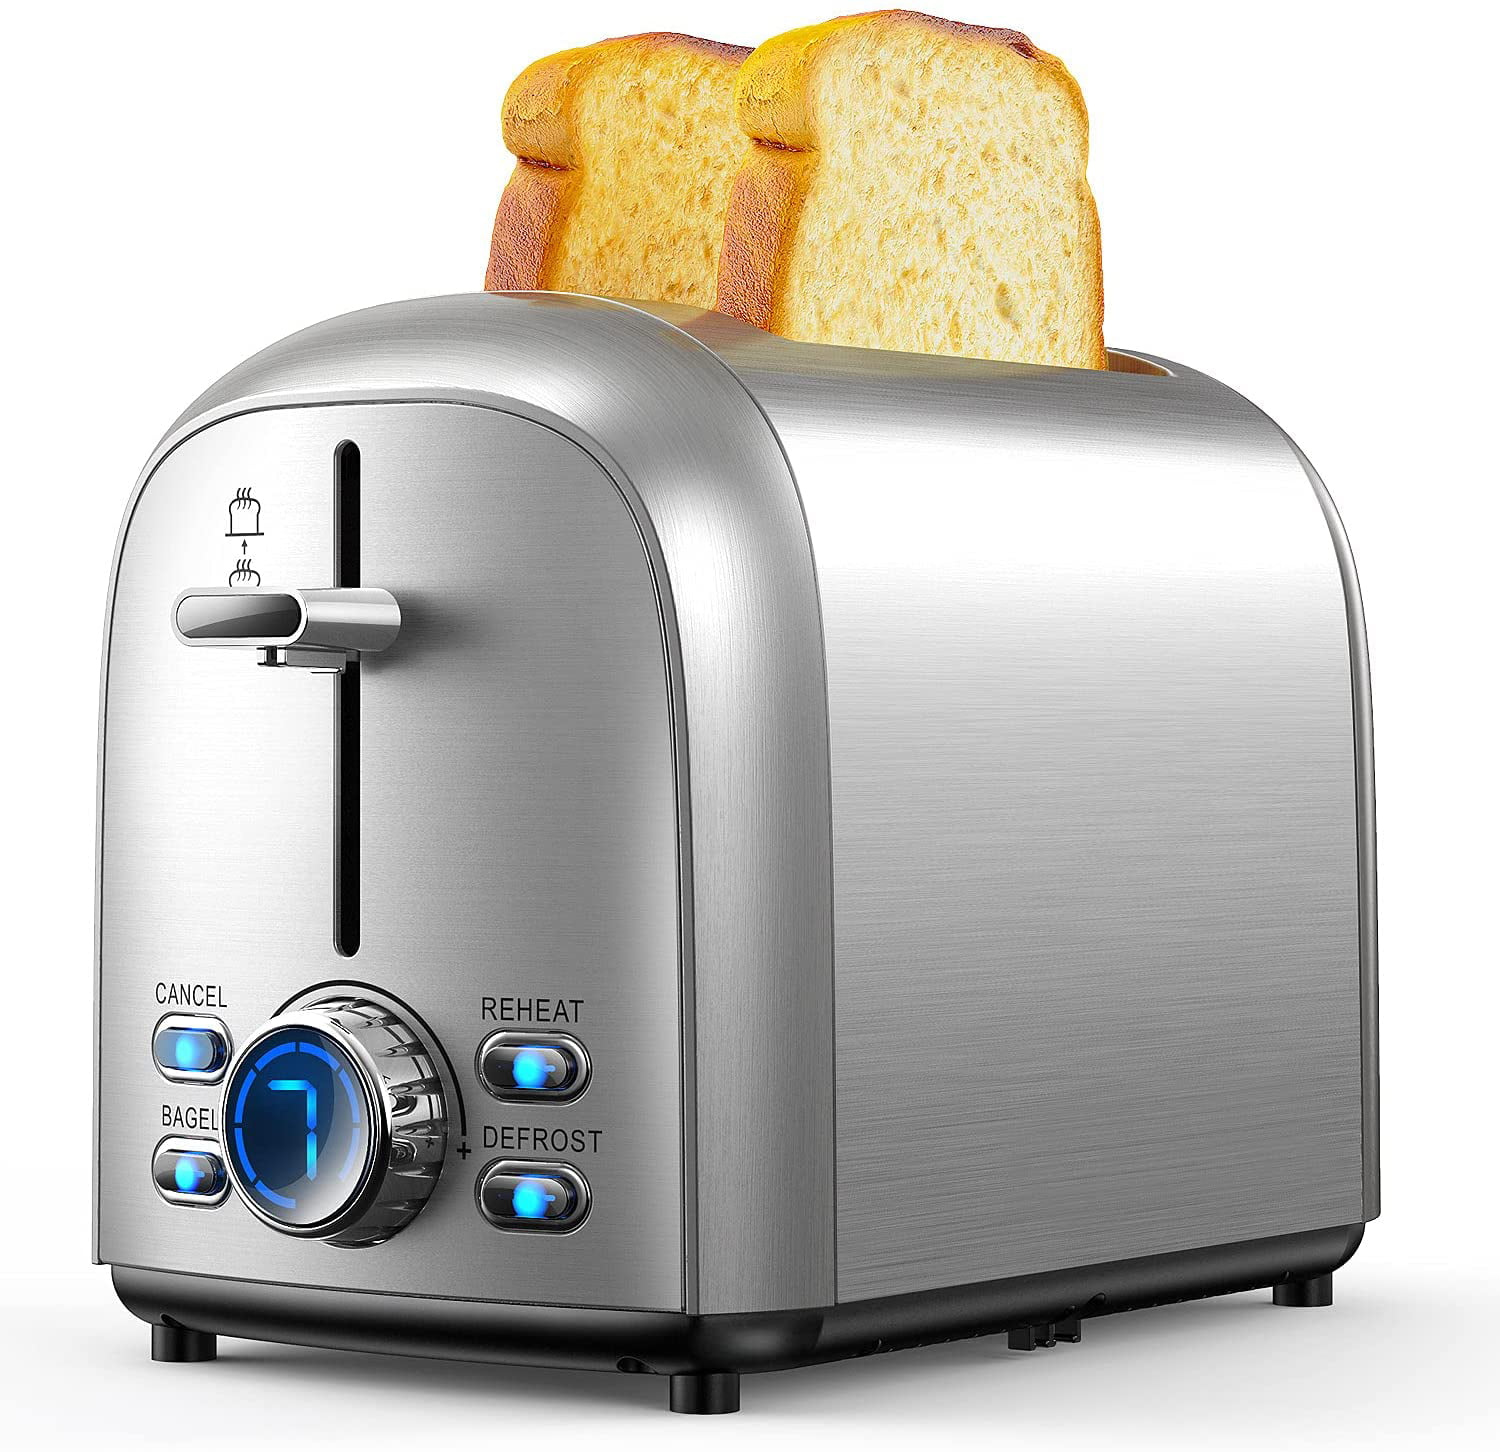 Classic Functions Toast Hand-Cut Bread Toaster 2 Slice Stainless Steel 2 Slots Toaster for Bangel 7 browning levels 